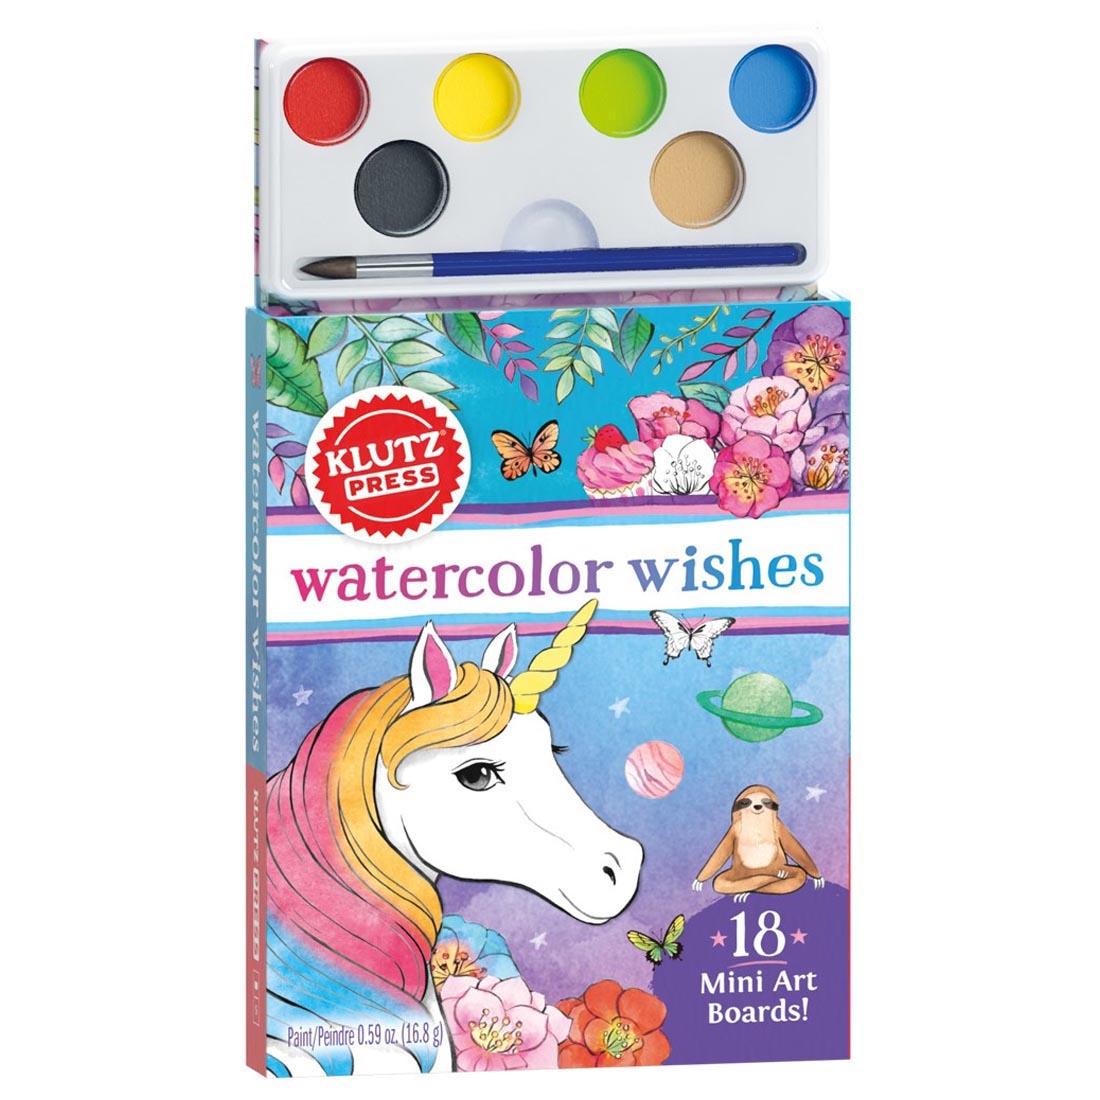 Watercolor Wishes Painting Kit By Klutz Press